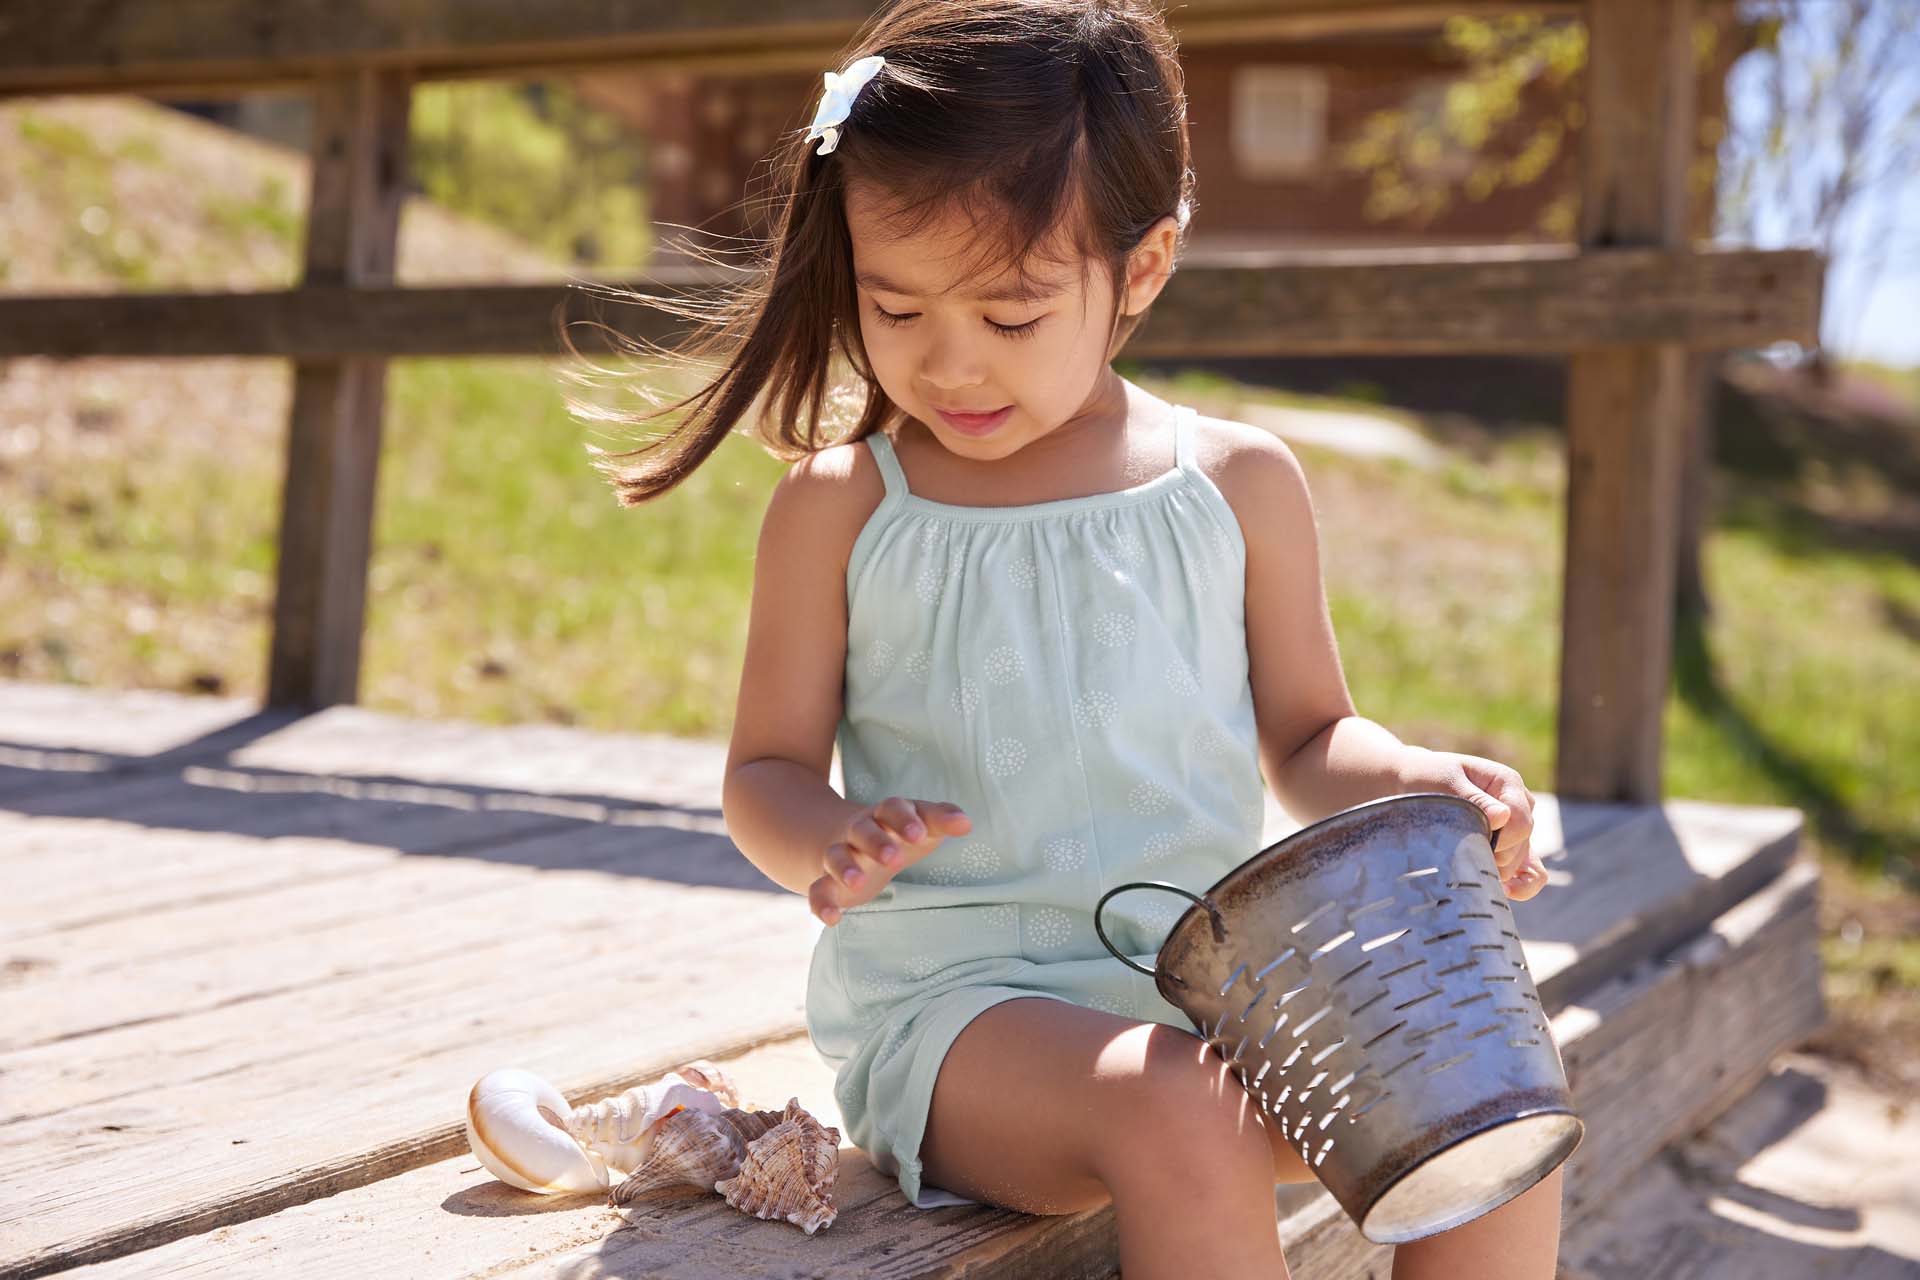 A young girl in a light blue romper sits on a wooden deck, examining seashells next to a metal bucket in a sunny, outdoor setting.